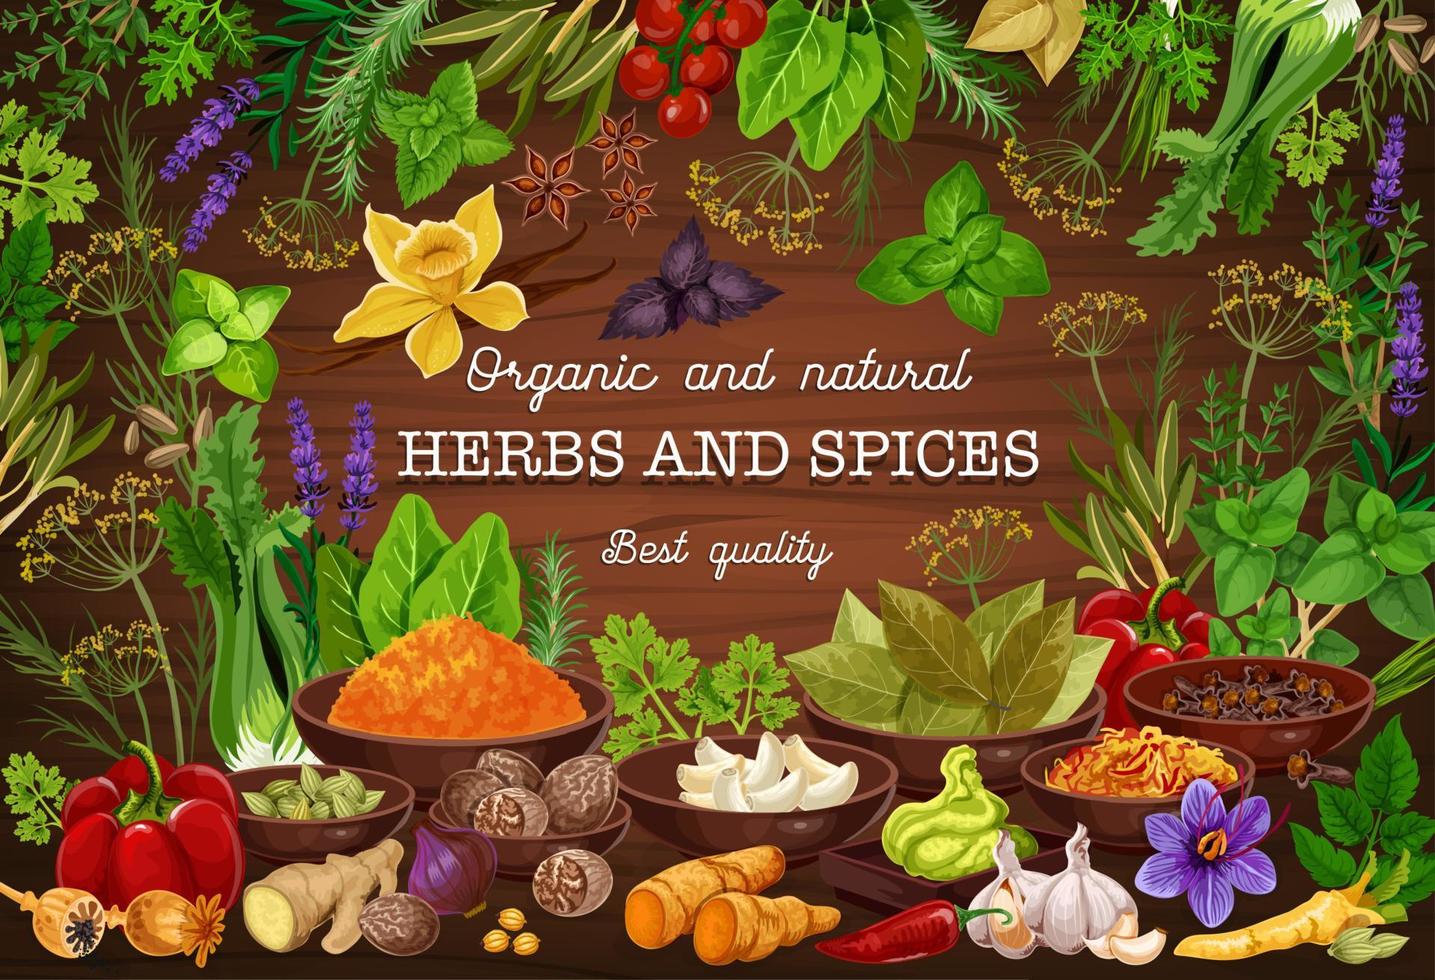 https://static.vecteezy.com/system/resources/previews/016/137/709/non_2x/spices-culinary-herbs-cooking-herbal-seasonings-vector.jpg